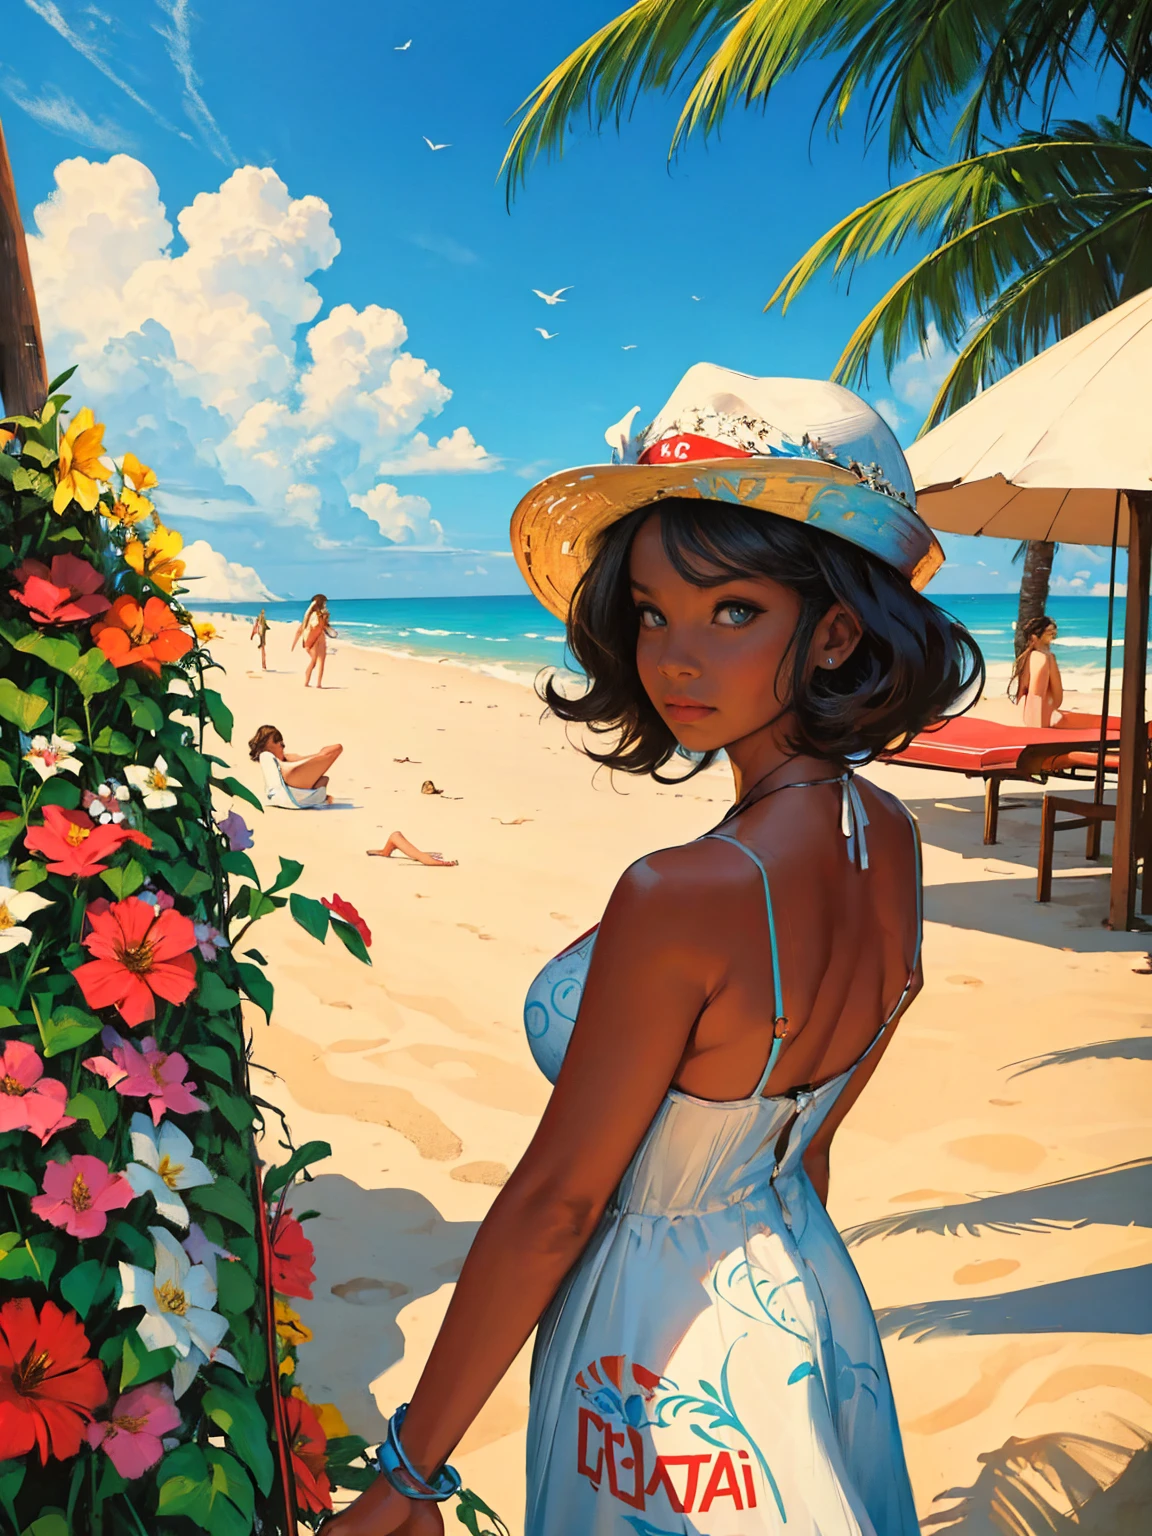 old retro poster, USSR,  Caribbean seaside, Neon, photo shoot, 1 ultra hot gorgeous woman. Age 23.  short white wavy hair, expressive breasts, in a white sundress with a pattern of flowers on fabric, fashionista, 80s, hd